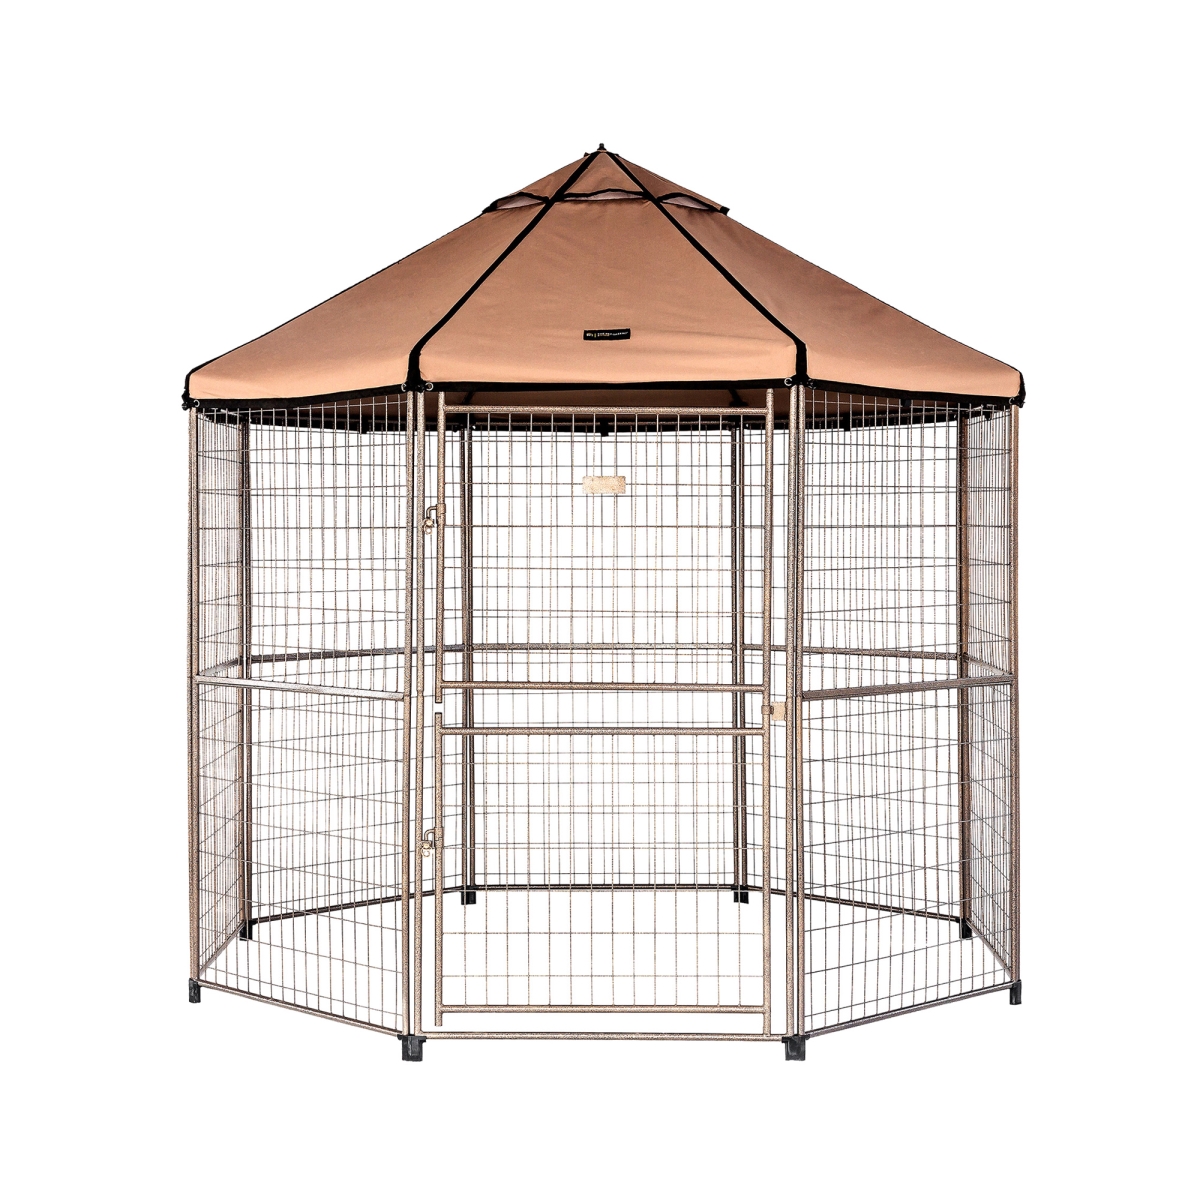 Picture of Pet Gazebo 23408ET 8 ft. Pet Gazebo with Earth Taupe Canopy